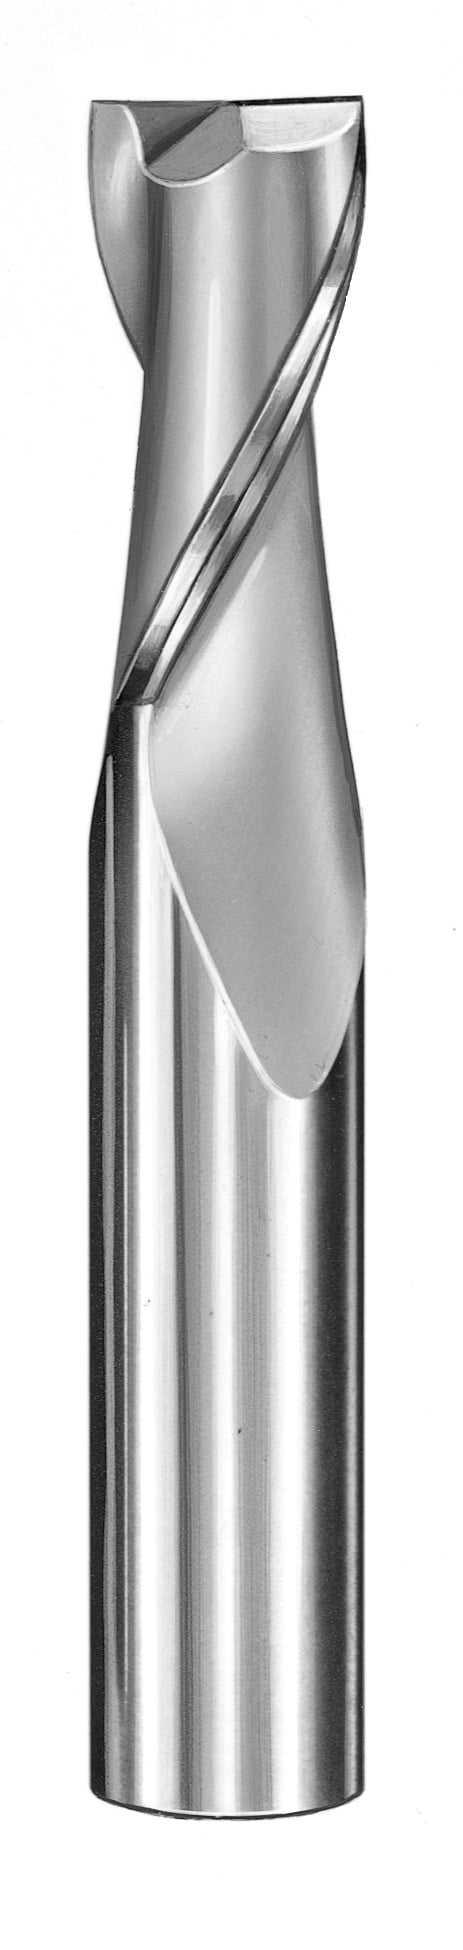 13/32" Dia, 2 Flute, Square End End Mill - 30351